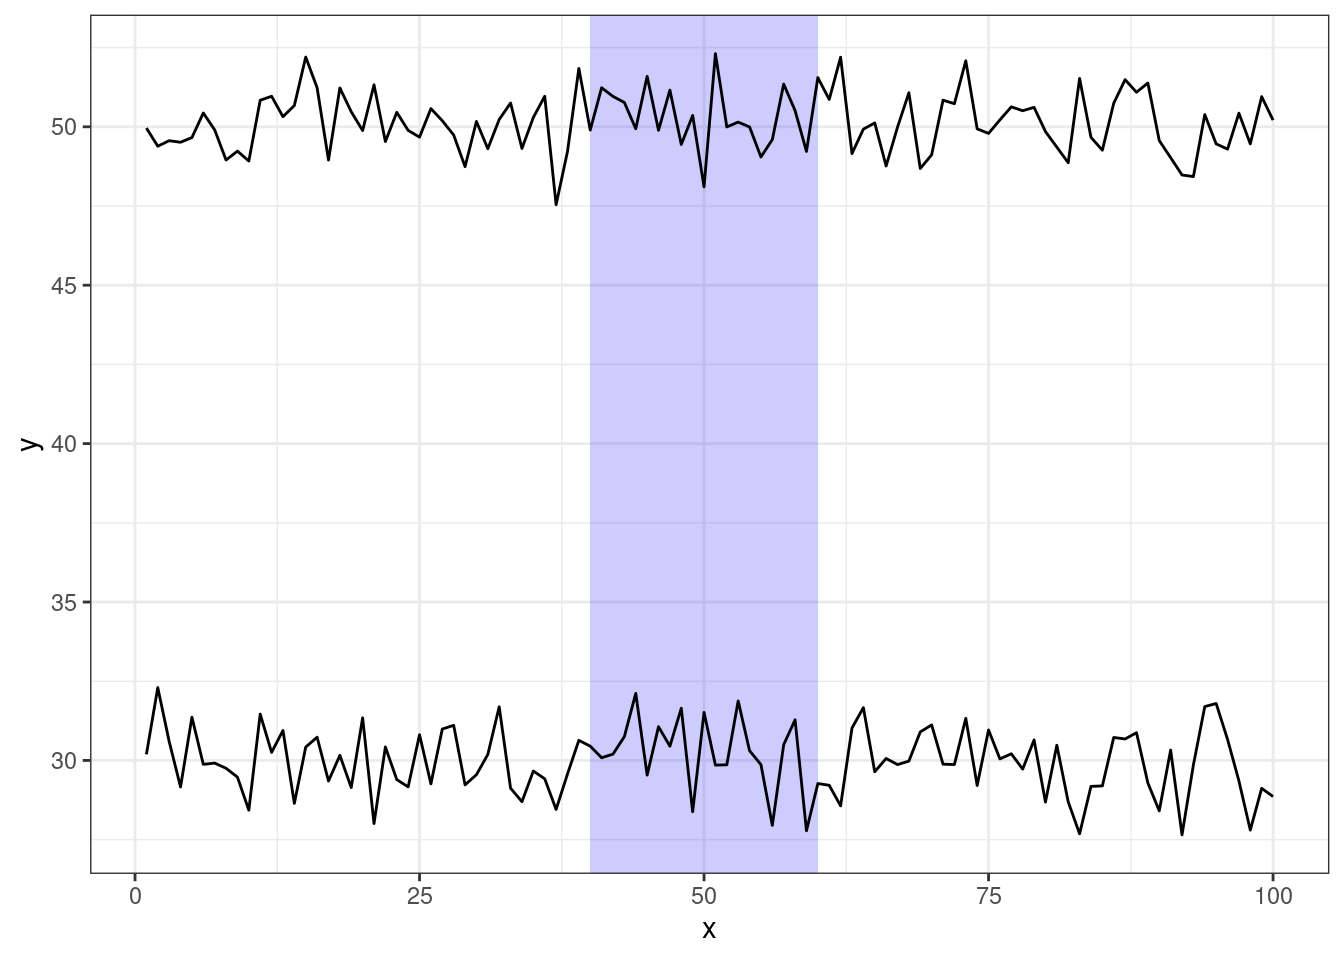 A time series with x = 40-60 highlighted